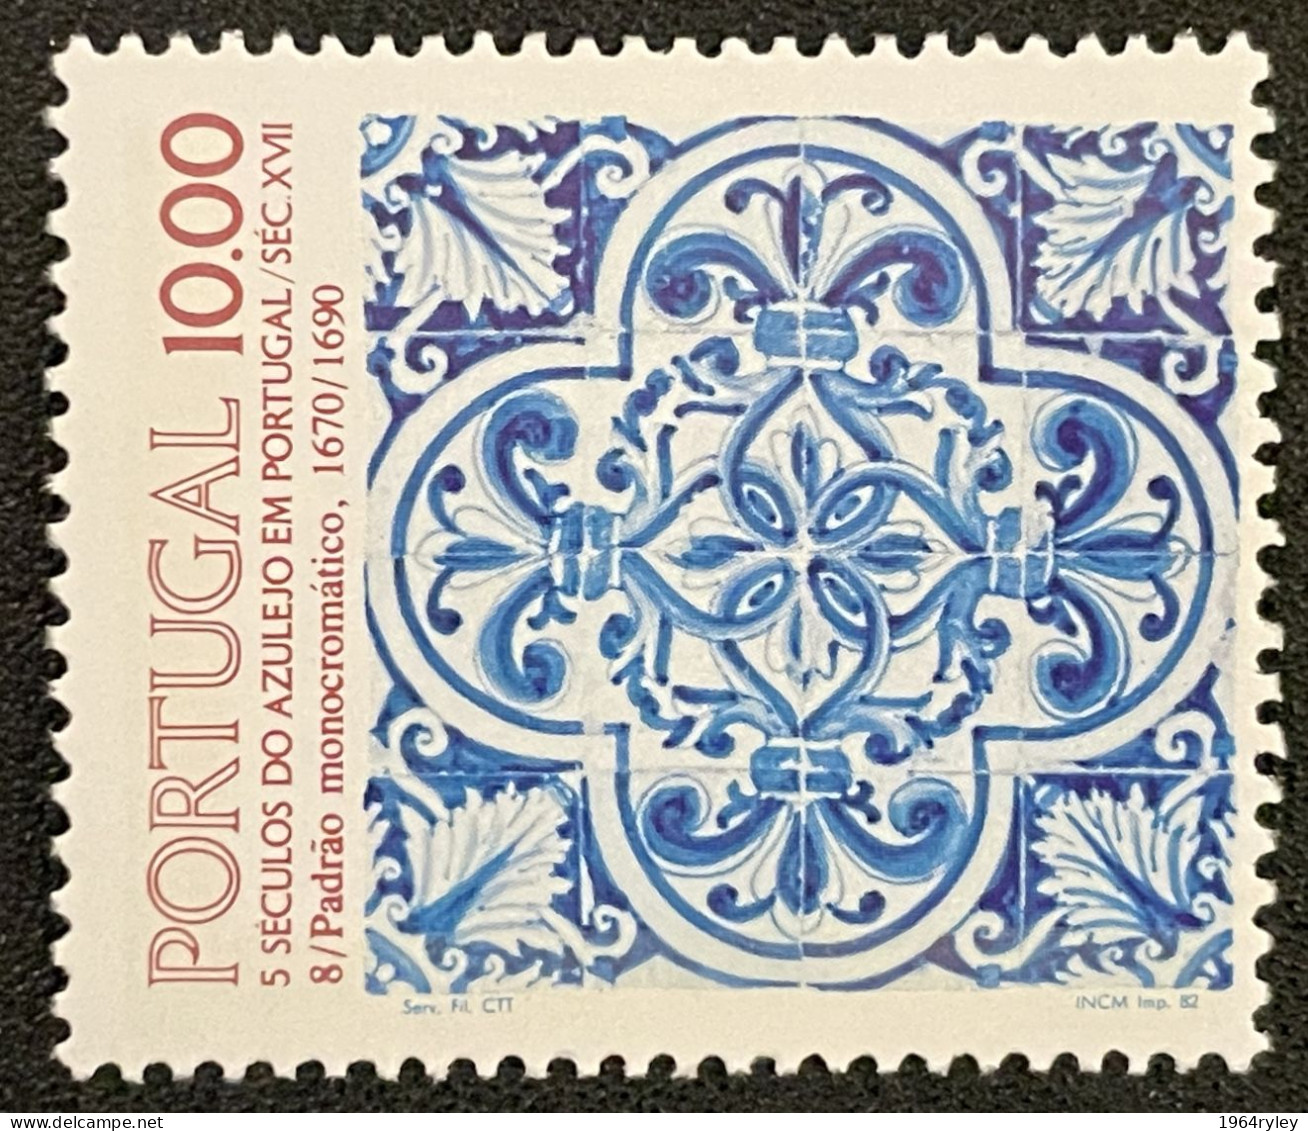 PORTUGAL - MNH** - 1982  - # 1582 - Unused Stamps